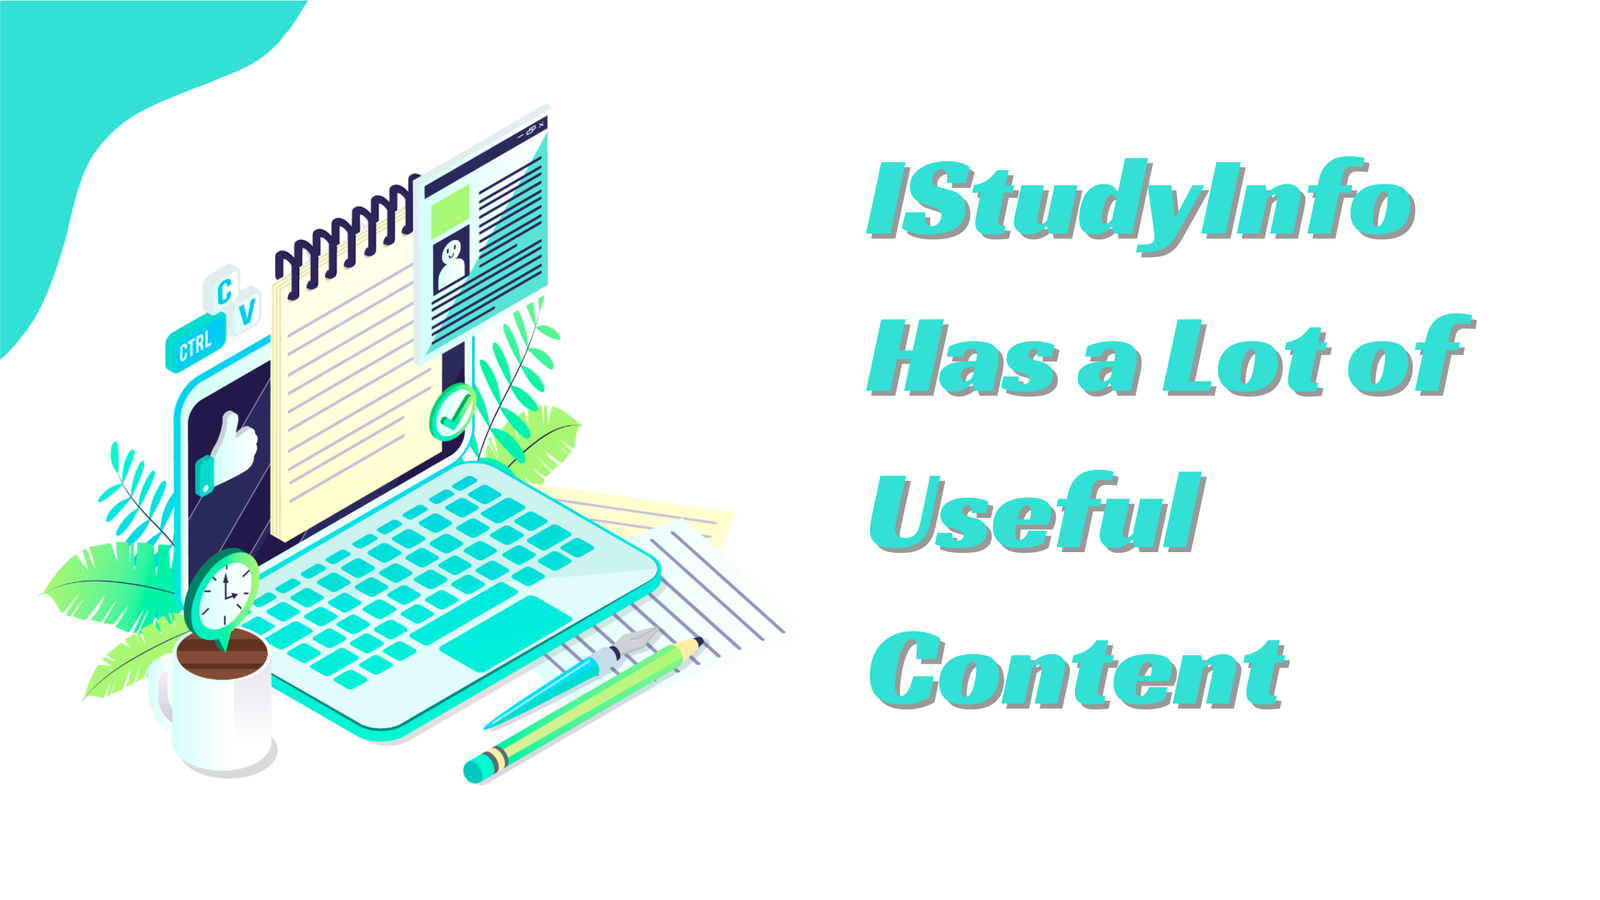 IStudyInfo Has a Lot of Useful Content